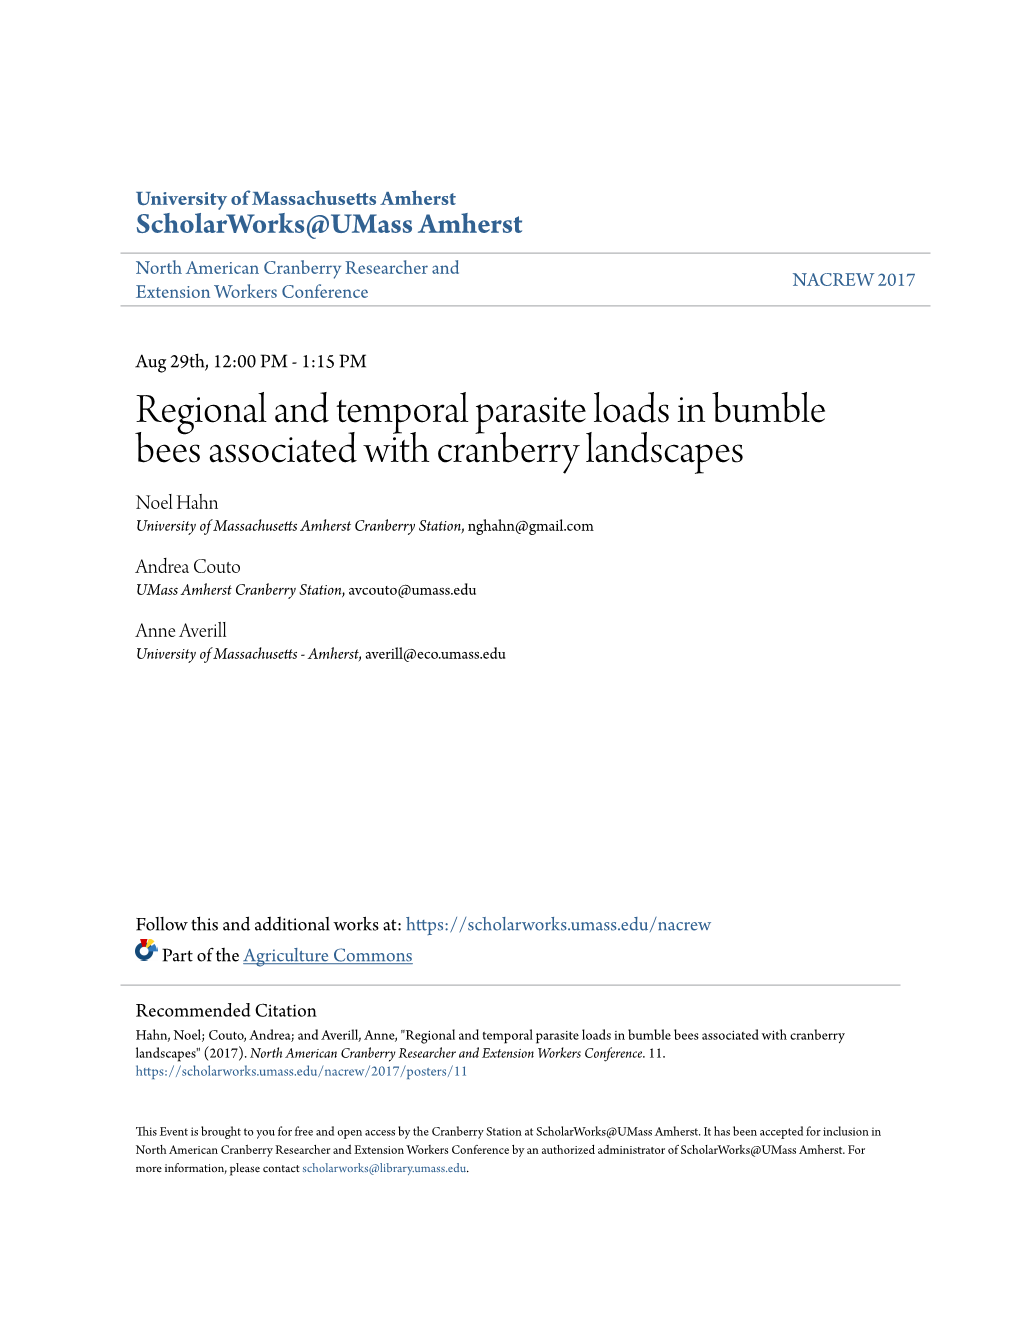 Regional and Temporal Parasite Loads in Bumble Bees Associated With